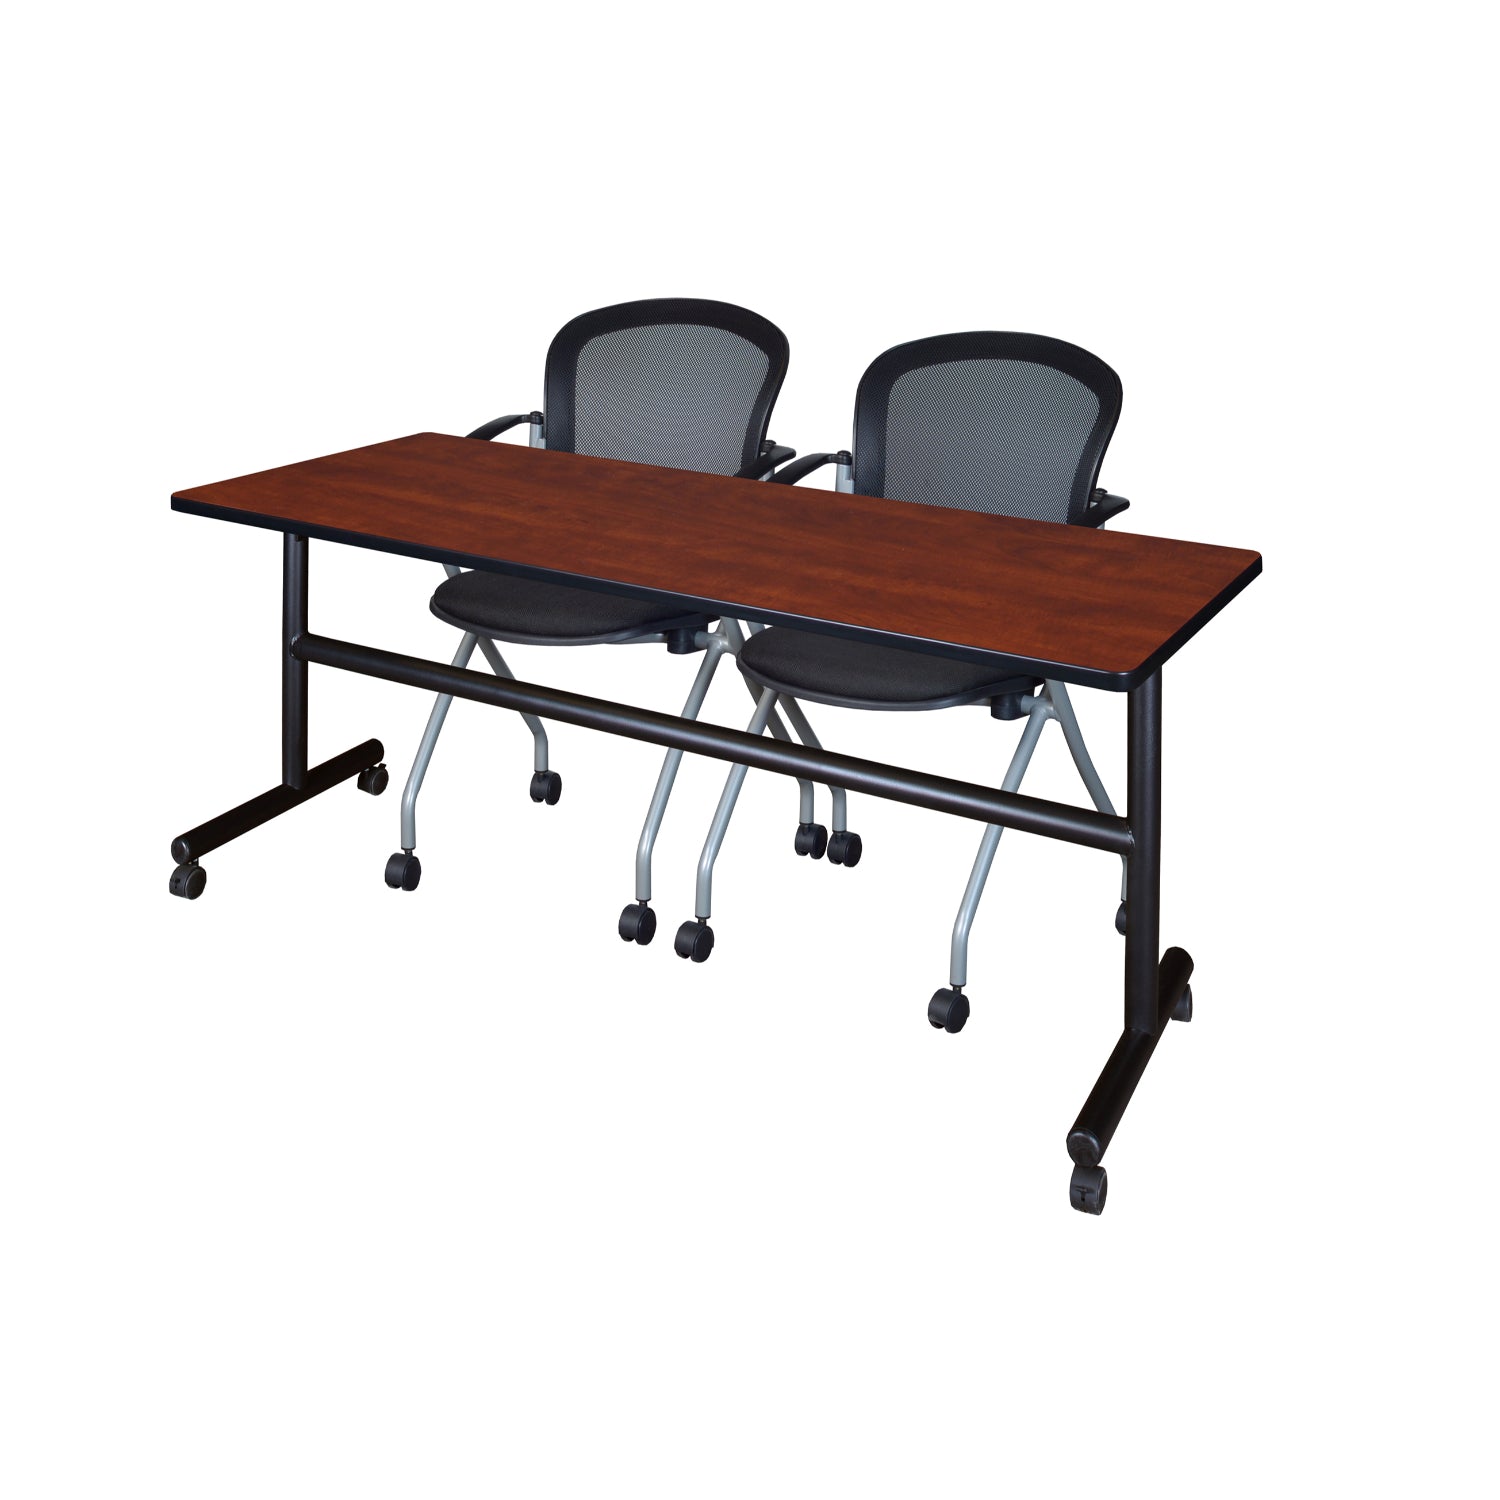 Kobe Flip Top Training Table and Chair Package, Kobe 72" x 24" Flip Top Mobile Nesting Table with 2 Cadence Nesting Chairs